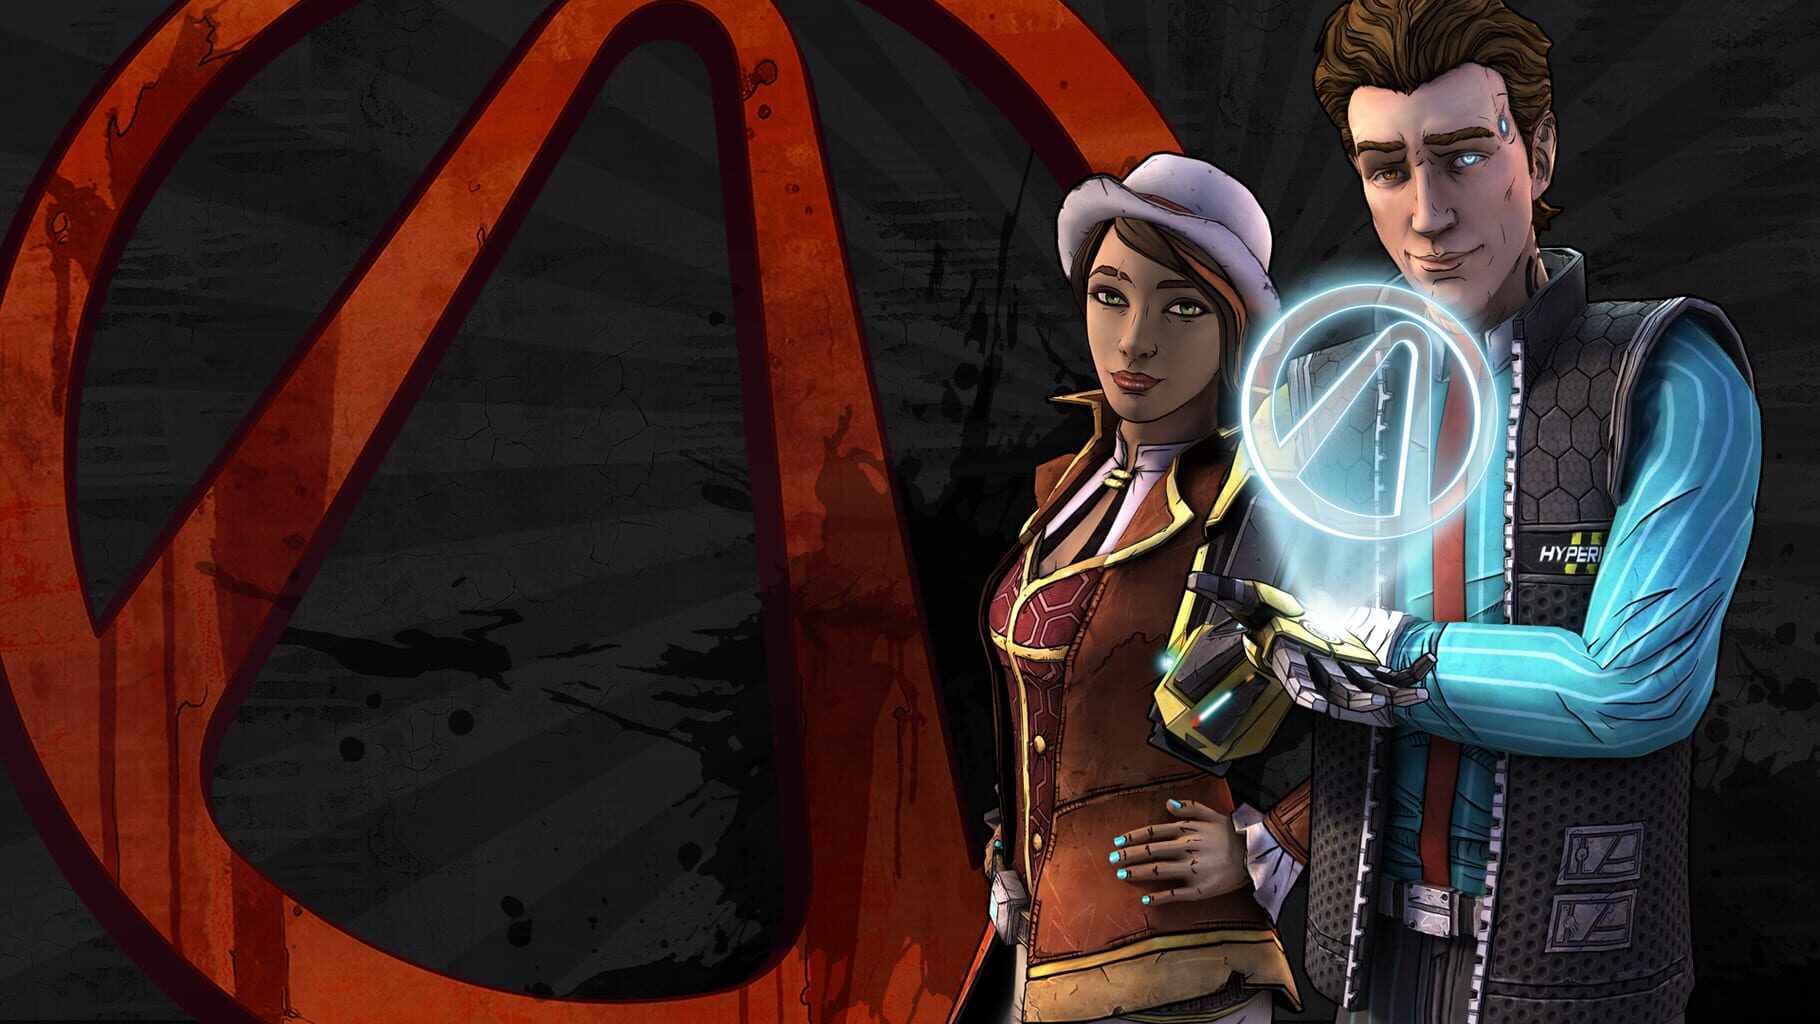 Artwork for Tales from the Borderlands